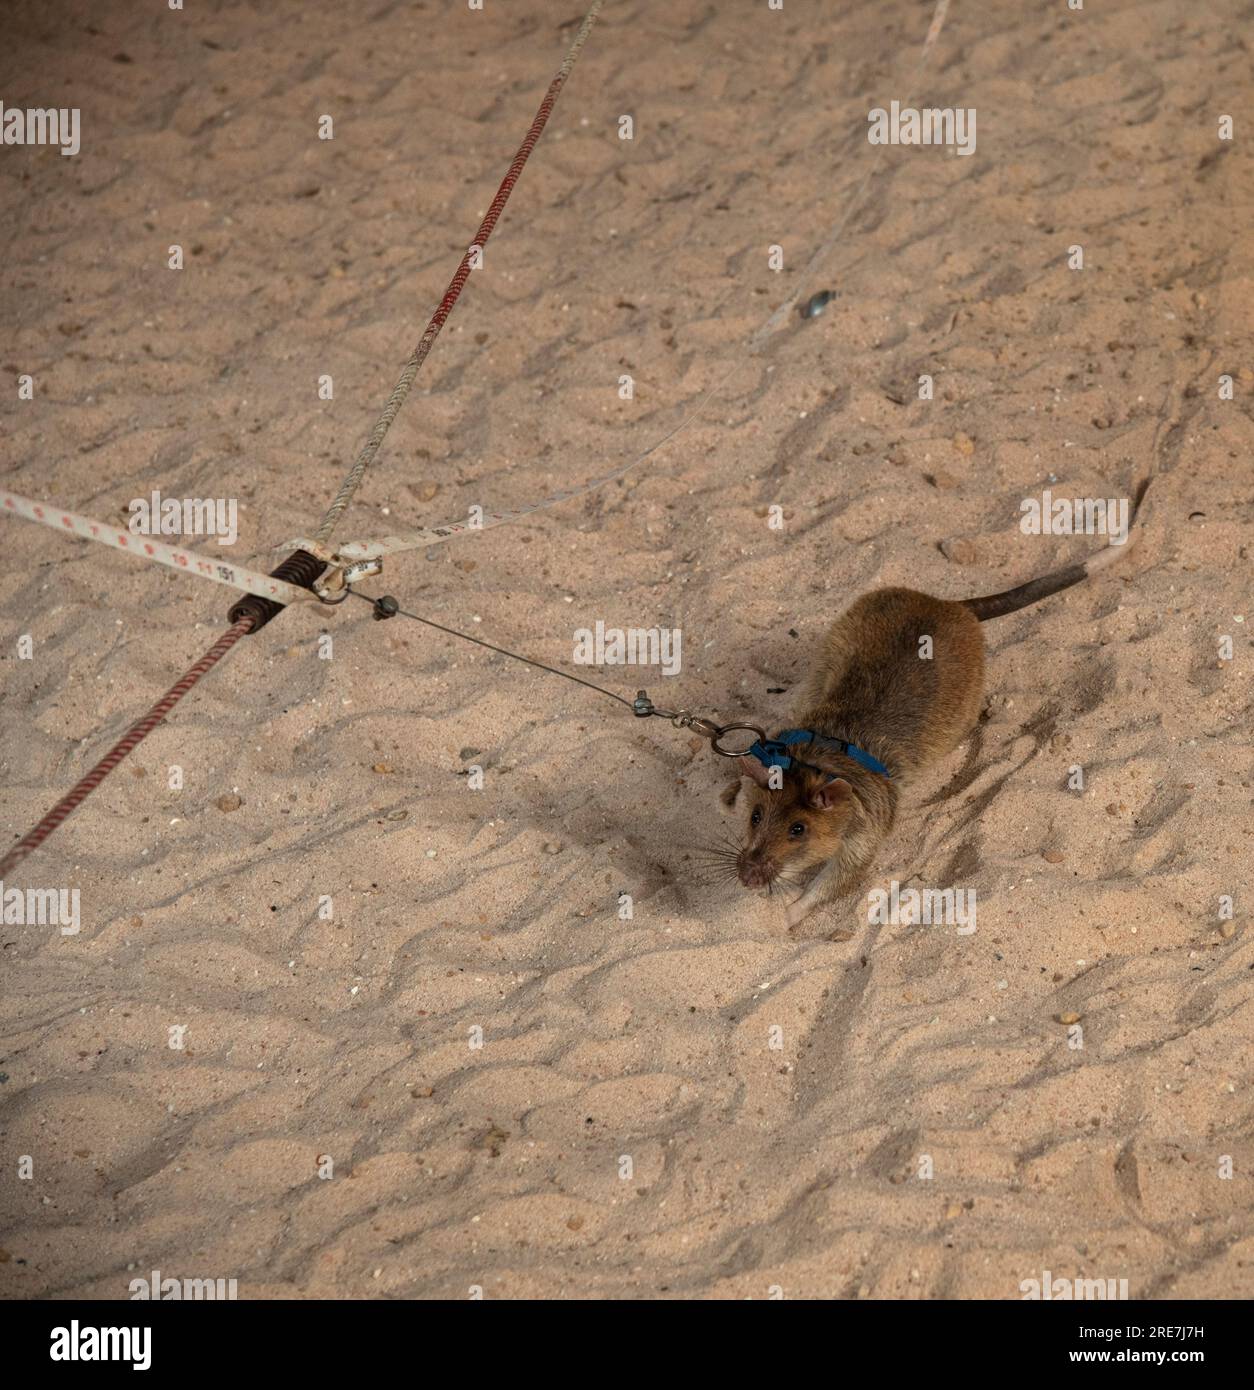 African Giant Land Rat searching area for mines, APOPO land mine clearance centre using Detection Rats to speed up land clearance, Siem Reap, Cambodia Stock Photo